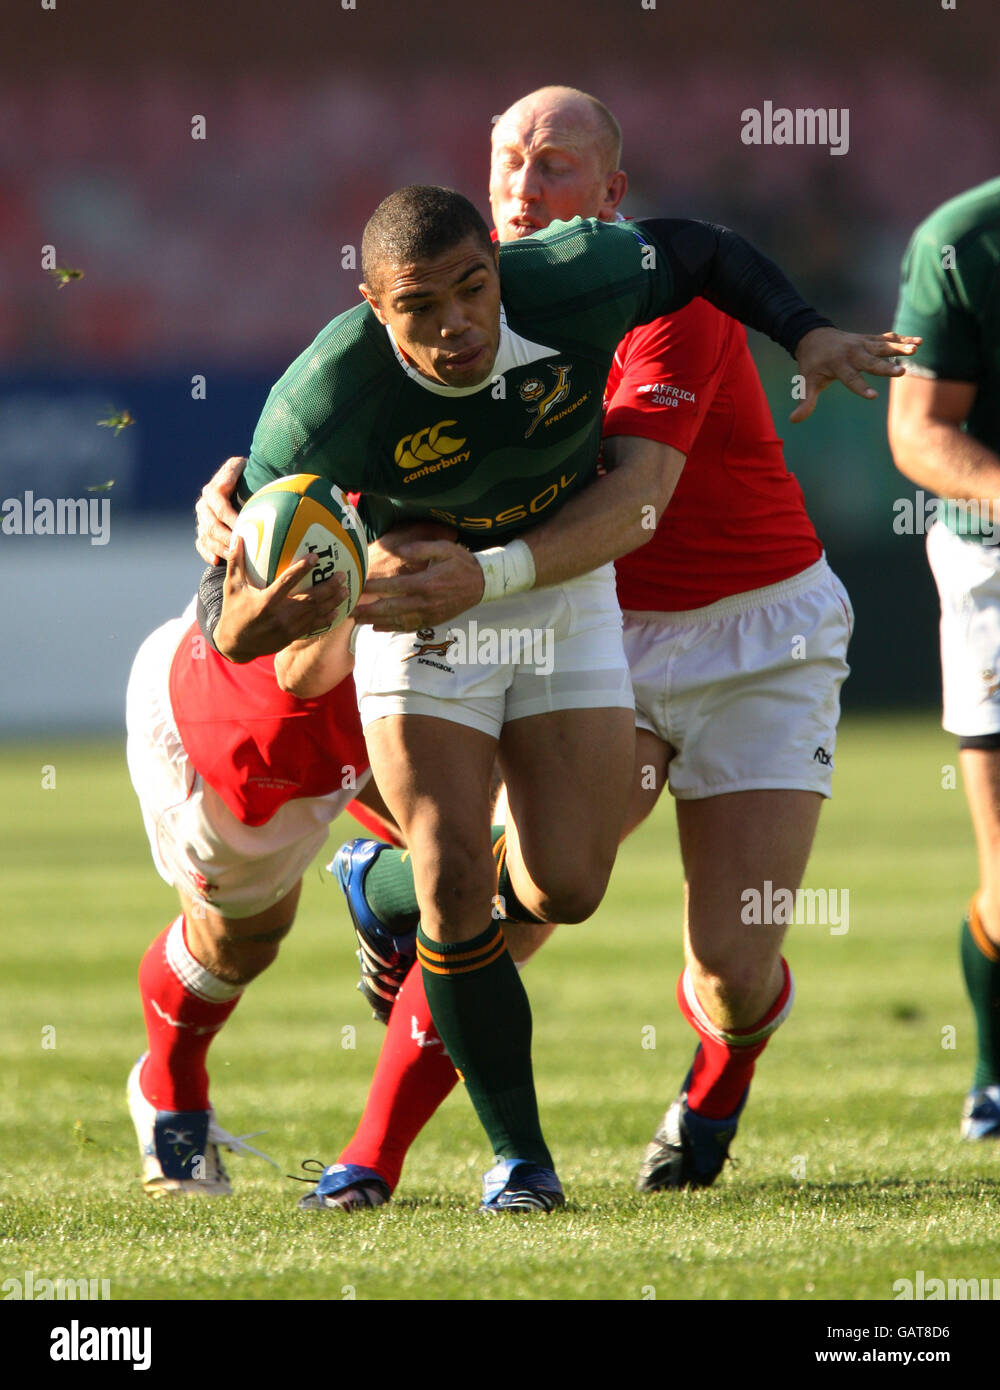 Rugby Union - South Africa v Wales - Loftus Park - Pretoria - South Africa Stock Photo